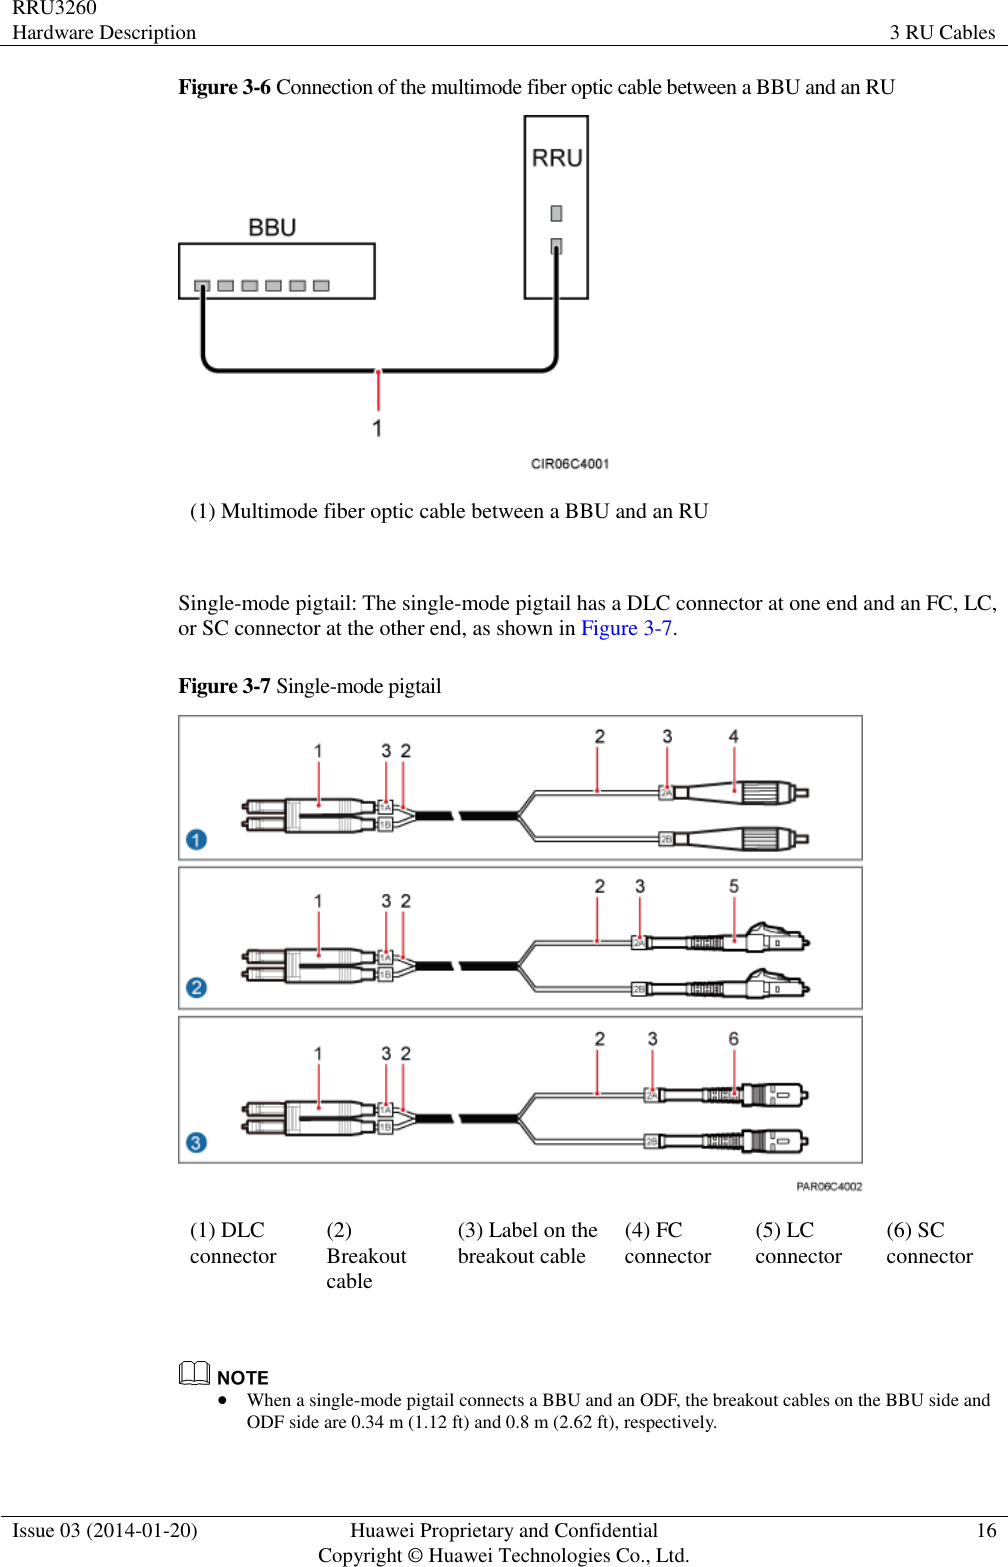 RRU3260 Hardware Description 3 RU Cables  Issue 03 (2014-01-20) Huawei Proprietary and Confidential                                     Copyright © Huawei Technologies Co., Ltd. 16  Figure 3-6 Connection of the multimode fiber optic cable between a BBU and an RU  (1) Multimode fiber optic cable between a BBU and an RU  Single-mode pigtail: The single-mode pigtail has a DLC connector at one end and an FC, LC, or SC connector at the other end, as shown in Figure 3-7. Figure 3-7 Single-mode pigtail  (1) DLC connector (2) Breakout cable (3) Label on the breakout cable (4) FC connector (5) LC connector (6) SC connector    When a single-mode pigtail connects a BBU and an ODF, the breakout cables on the BBU side and ODF side are 0.34 m (1.12 ft) and 0.8 m (2.62 ft), respectively. 